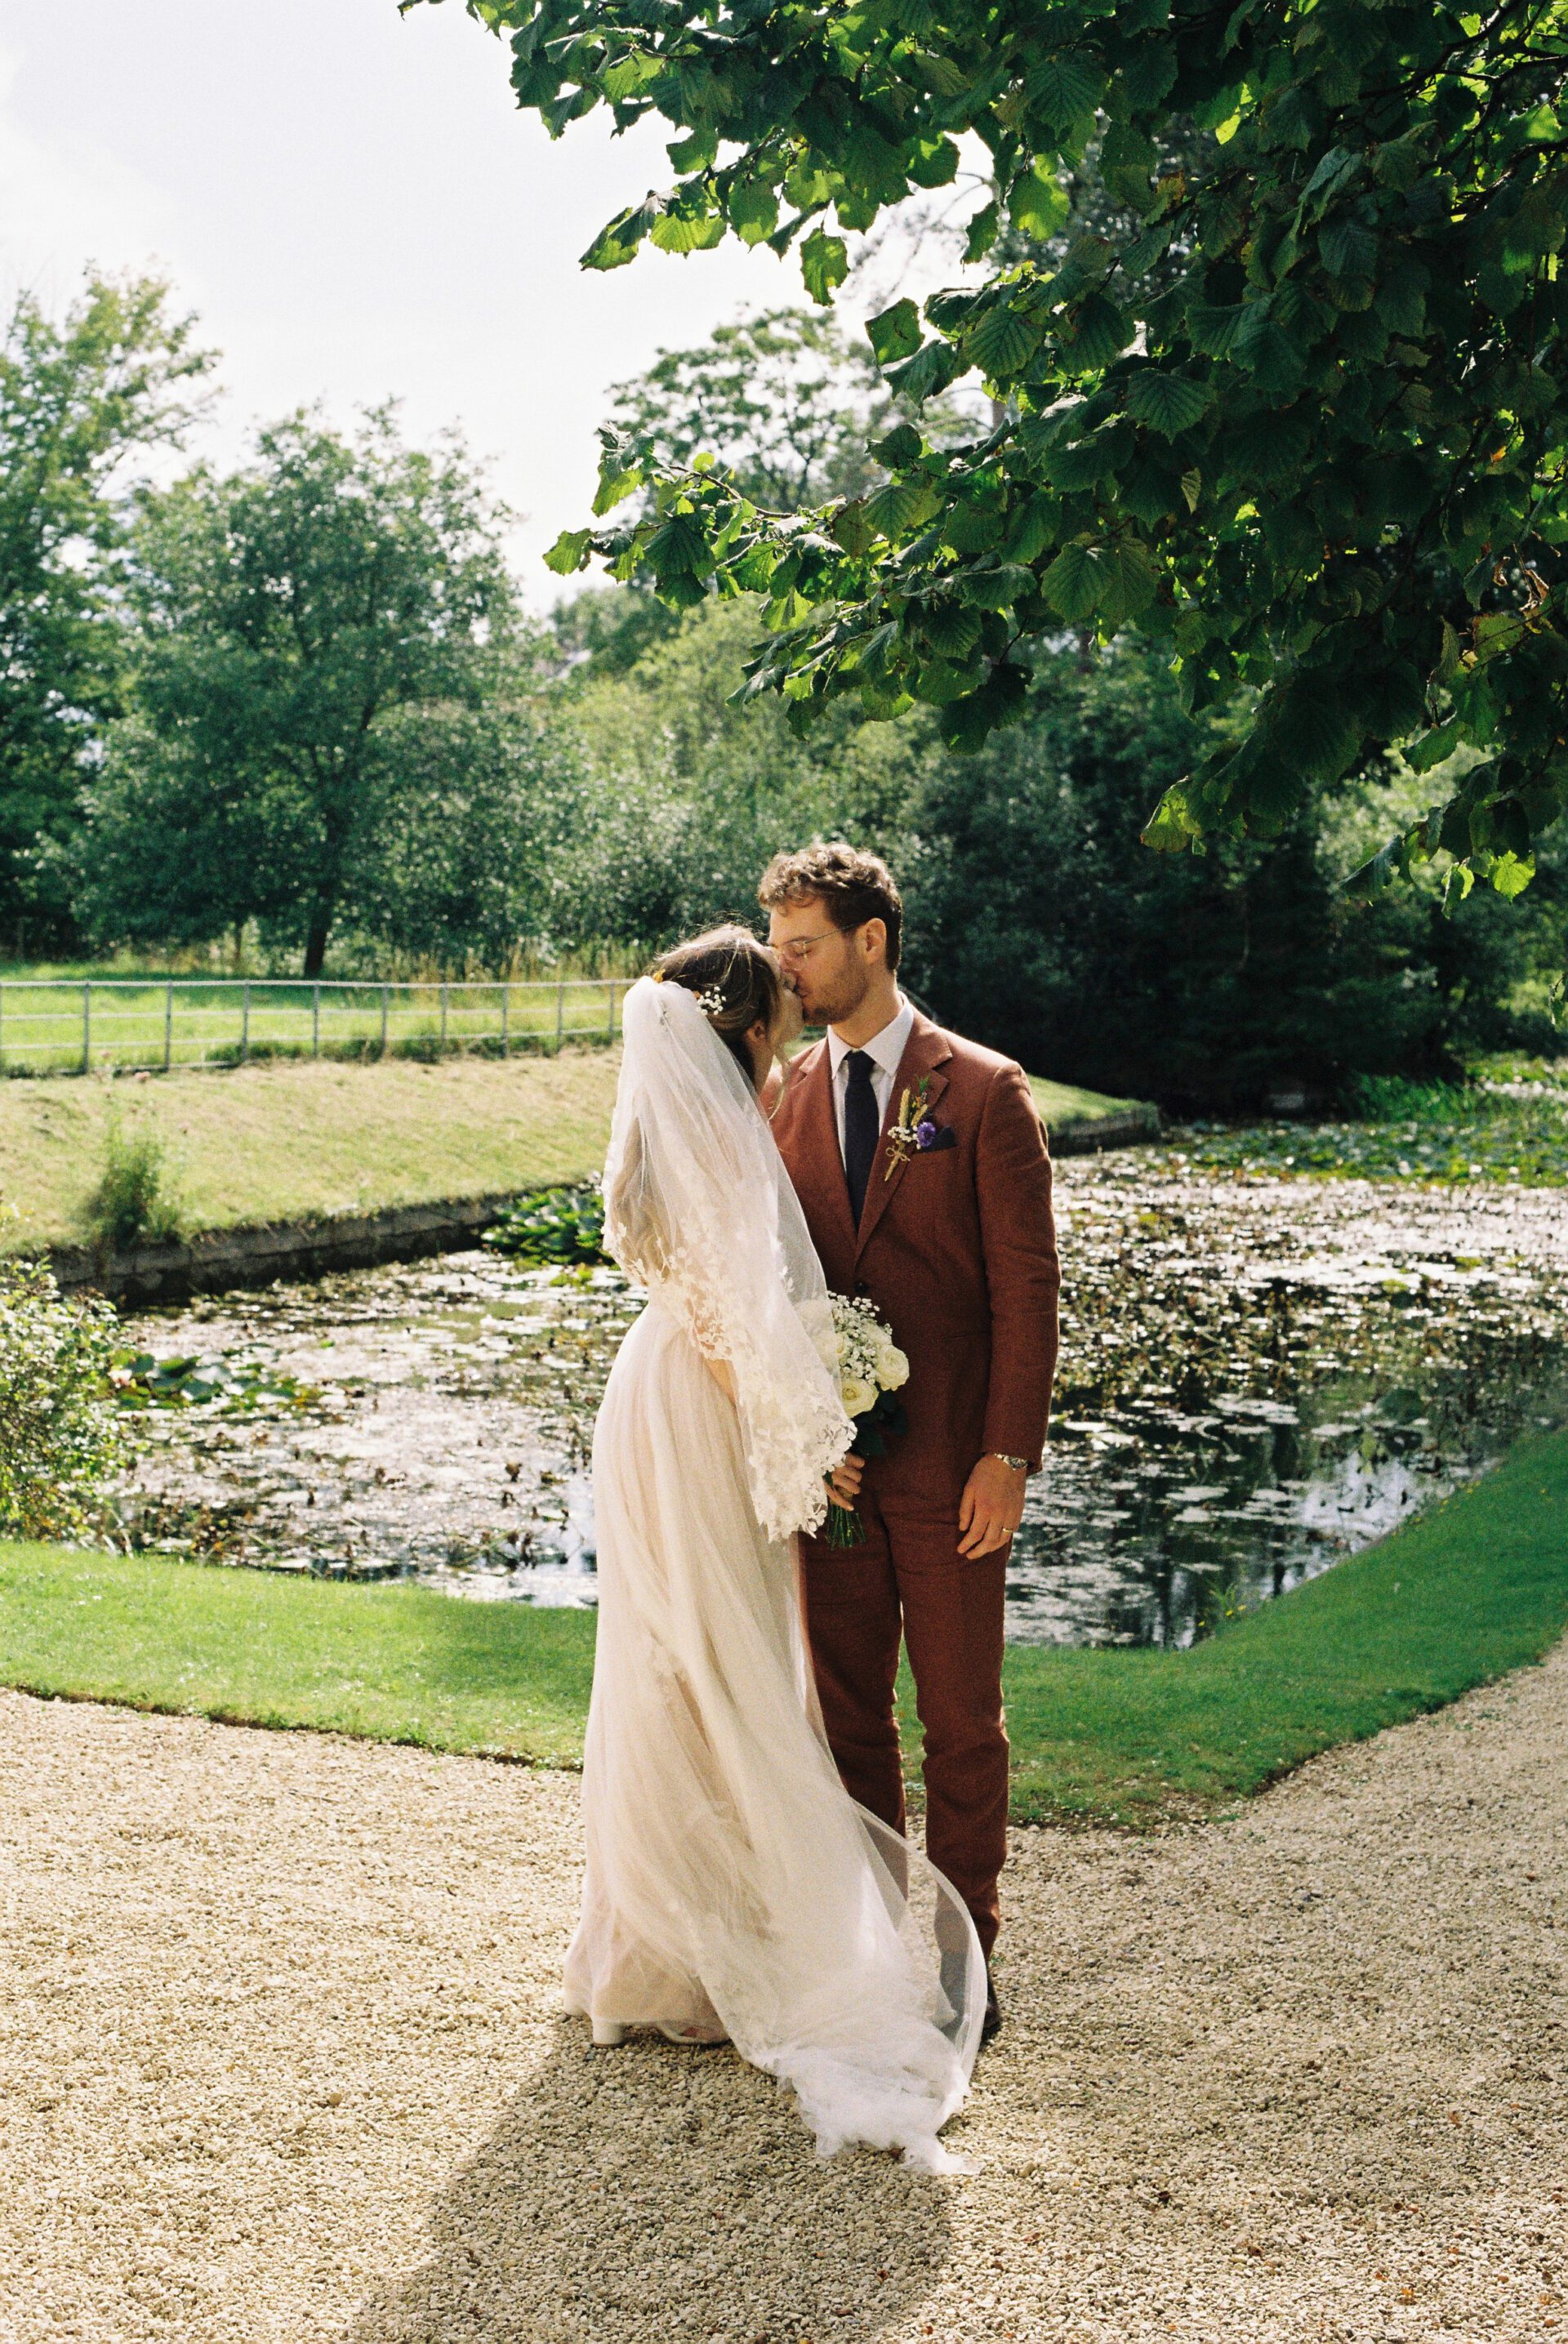 35mm film wedding photography couple portrait in Gloucestershire